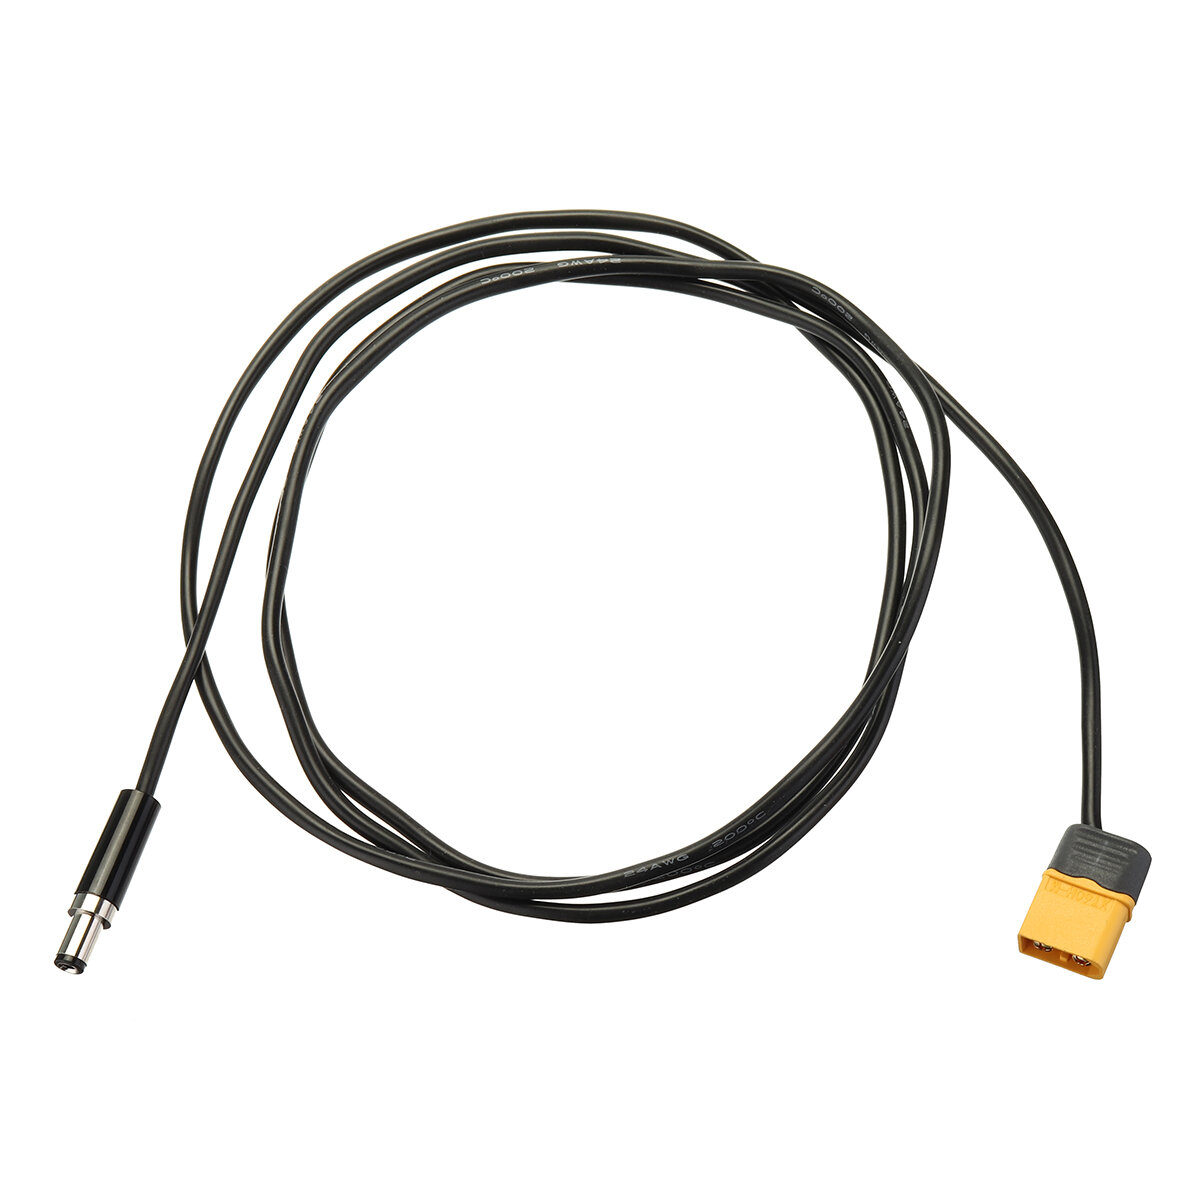 XT60 to DC5525 (5.5-2.5) Power Cable 150cm for TS100 Soldering Iron